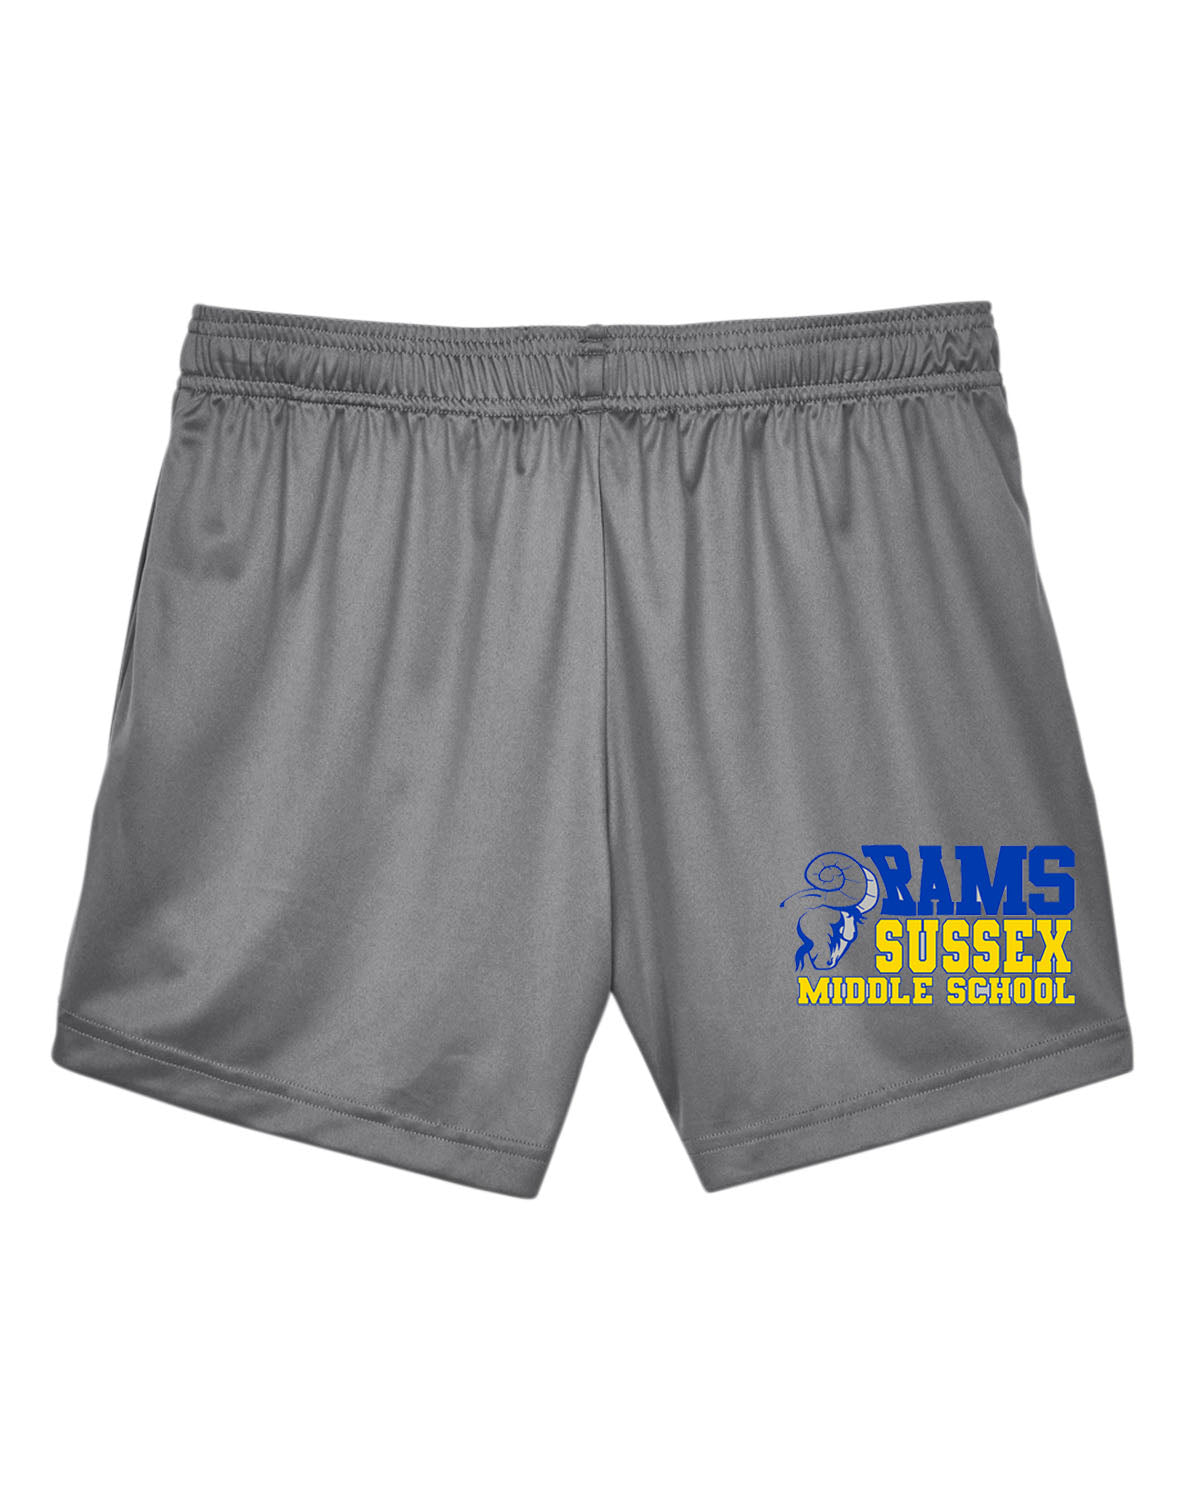 Sussex Middle Adult Ladies Performance Design 2 Shorts